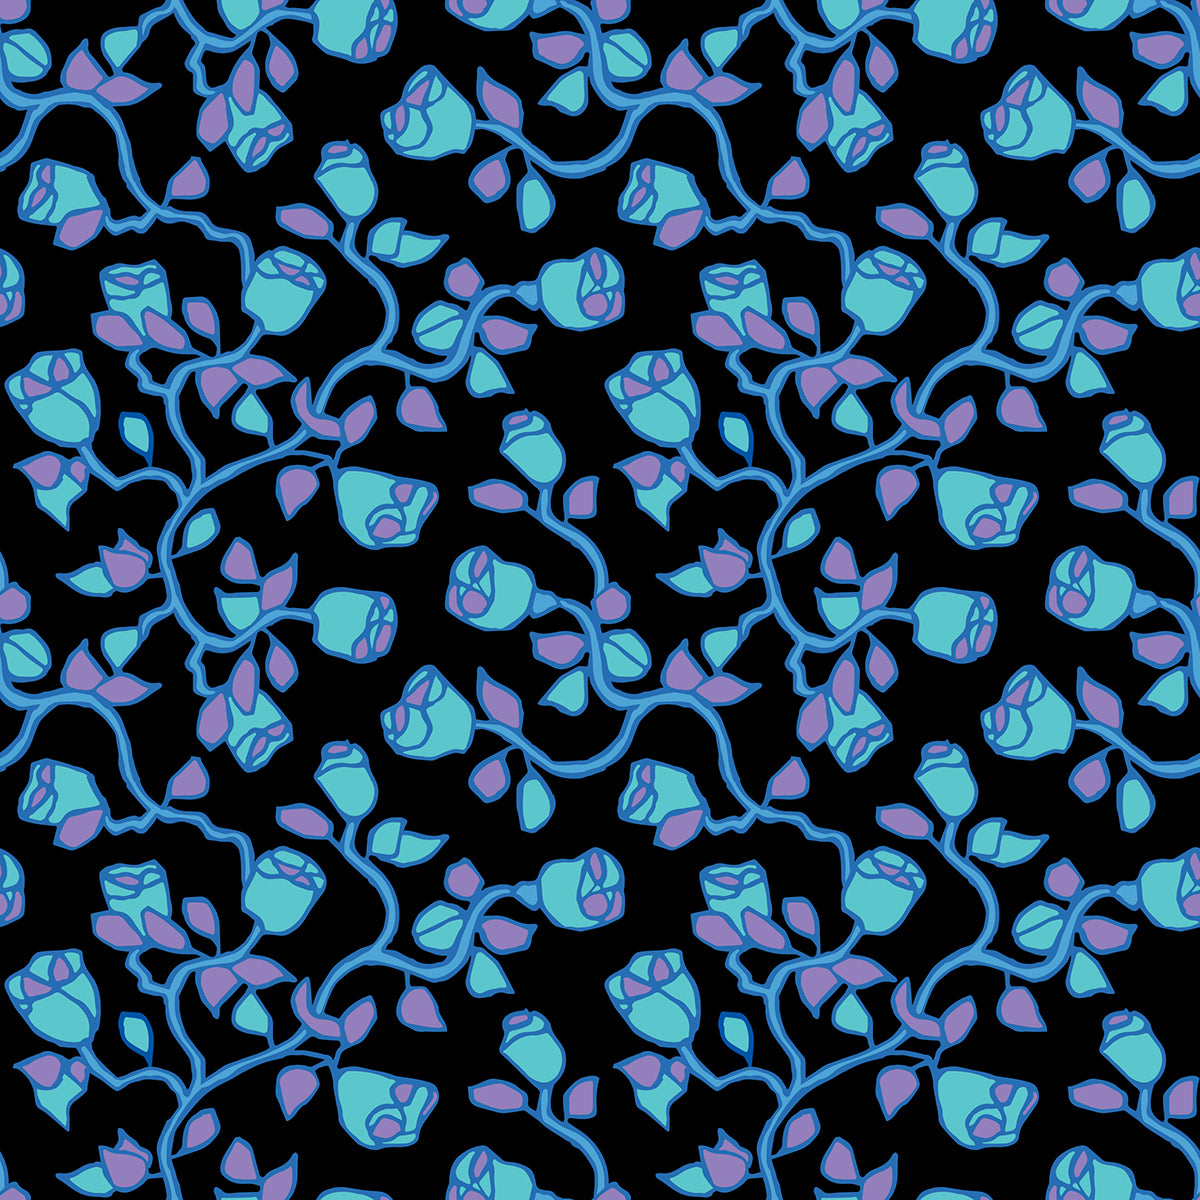 Beach Rose Arctic features a repeating pattern in black, blue, aqua, and purple colors of organic, hand-drawn rose vines.